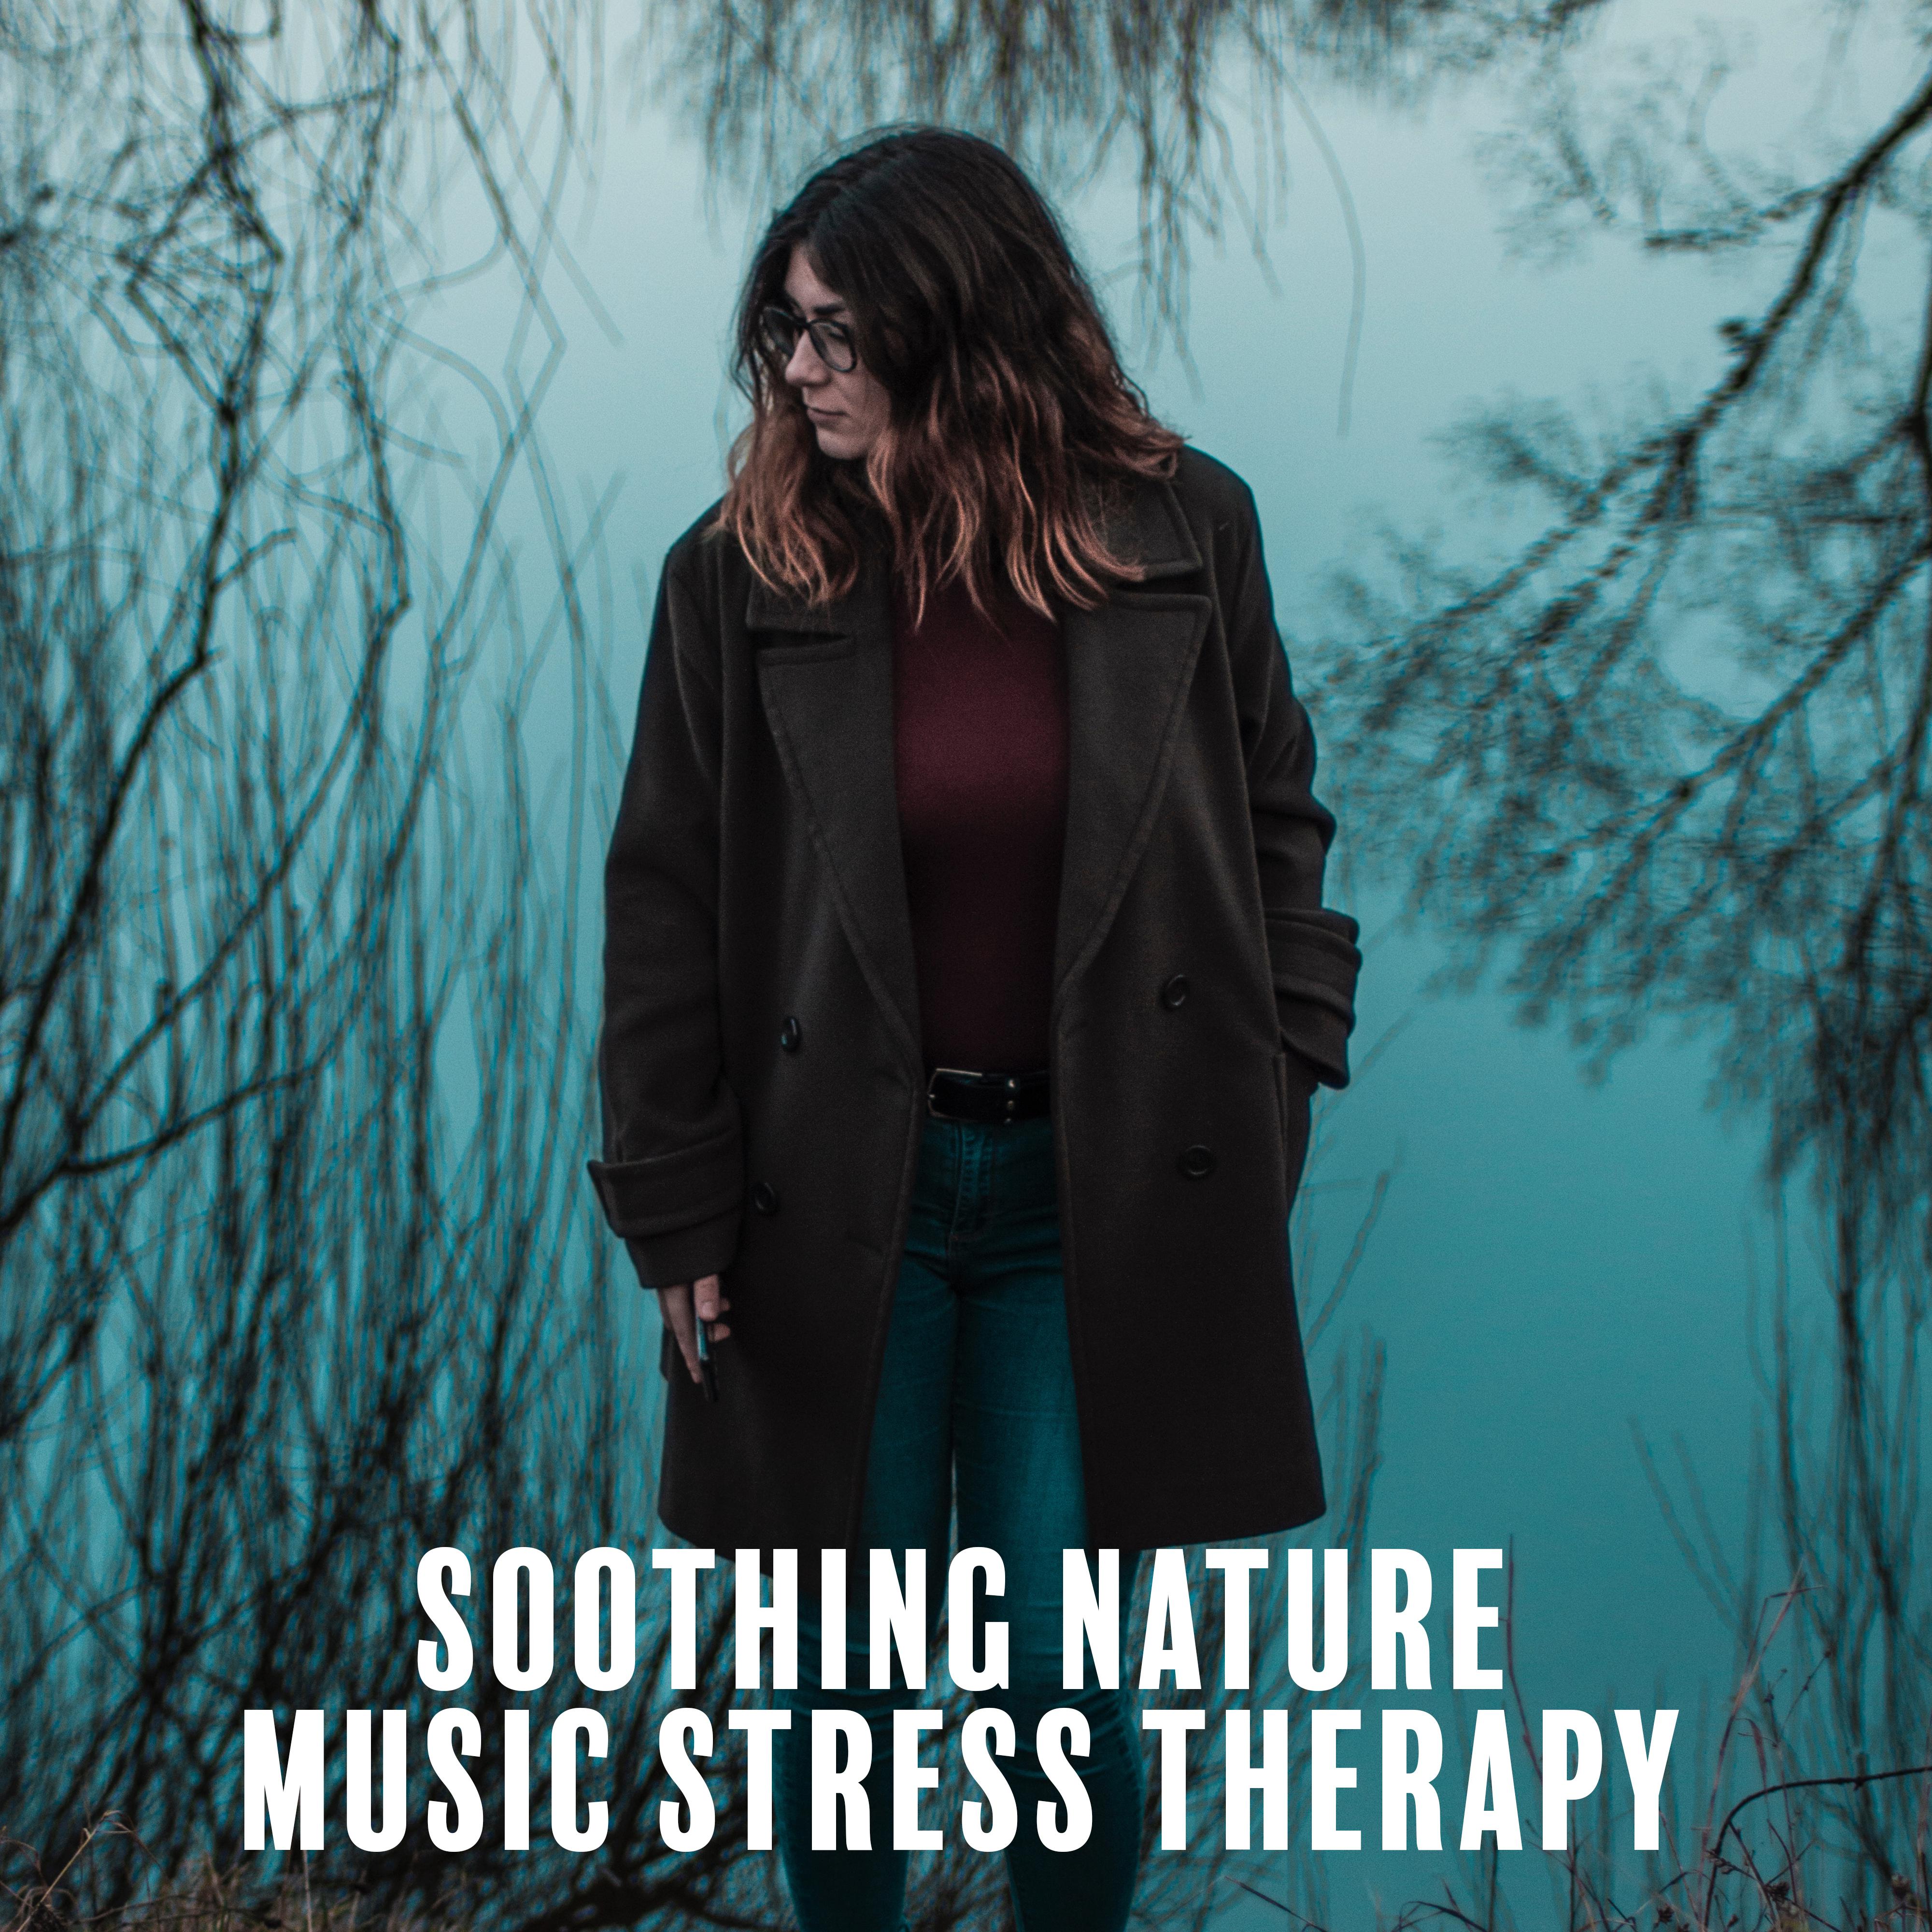 Soothing Nature Music Stress Therapy: 15 New Age Soft Melodies for Calming Down, Relax & Stress Relief